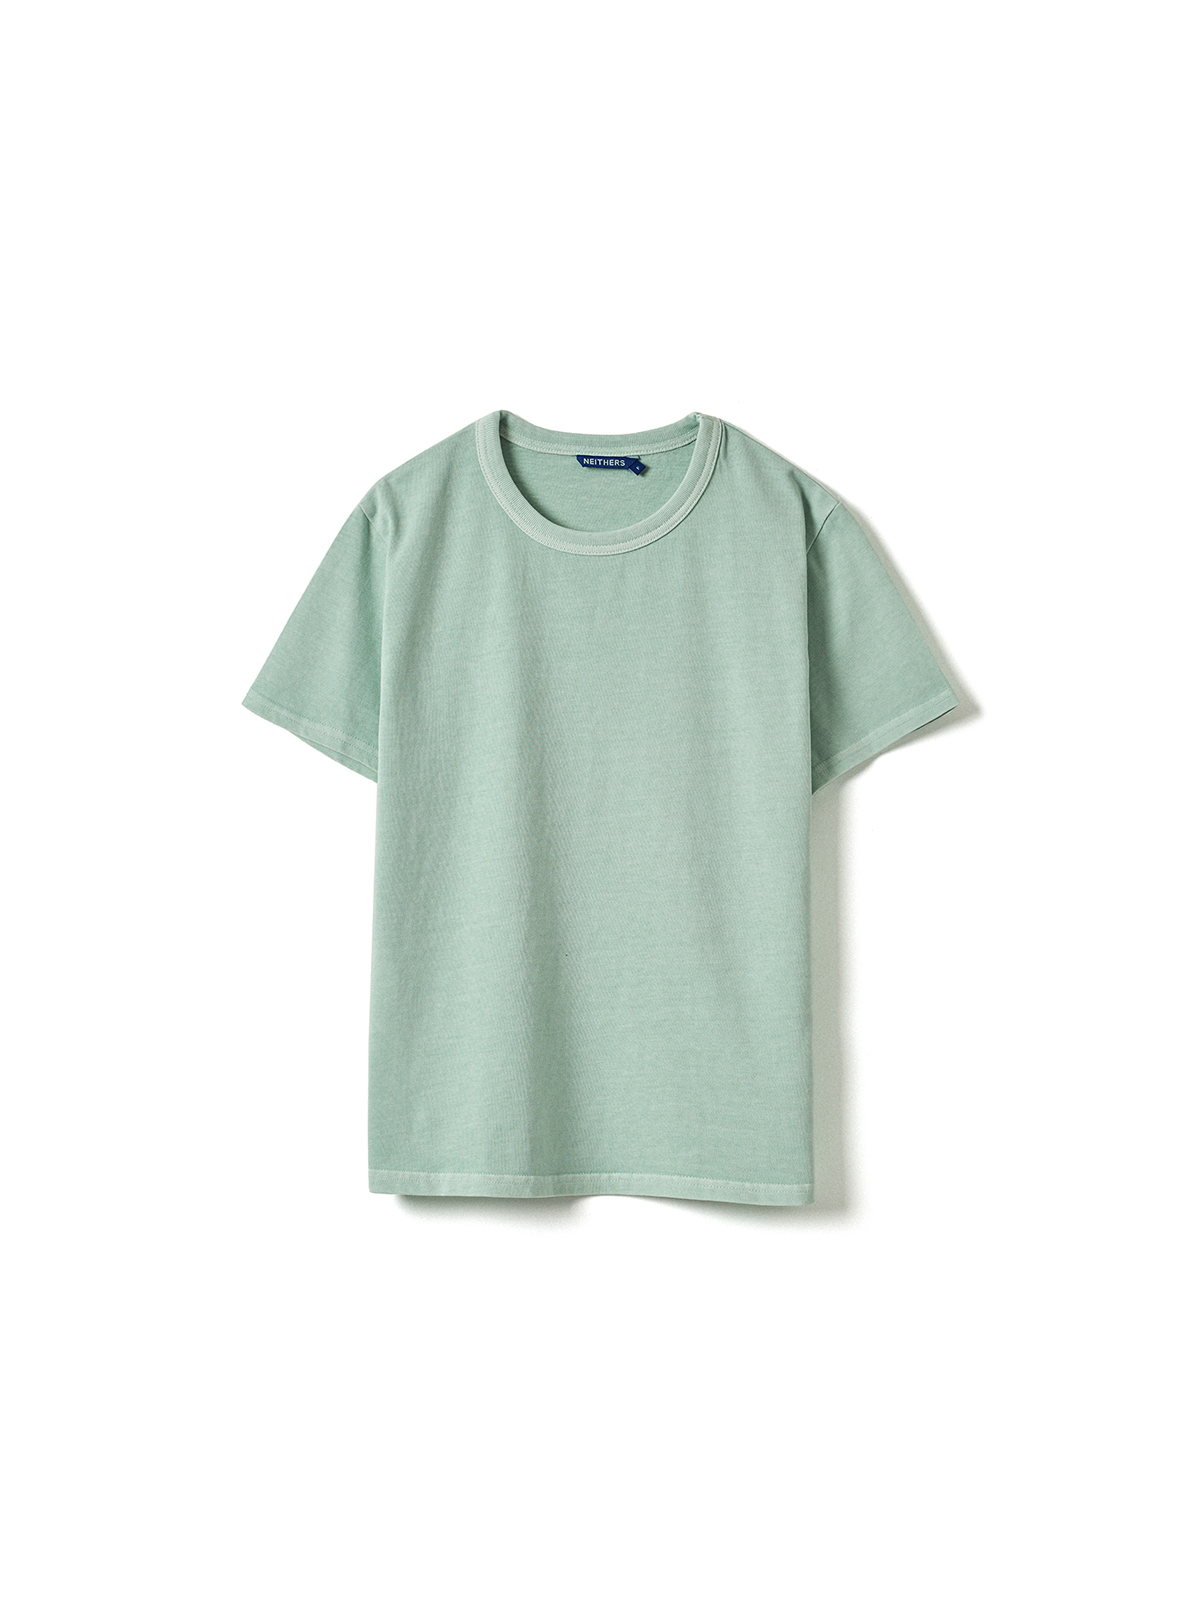 GARMENT DYED T- FOR WOMEN (MINT)